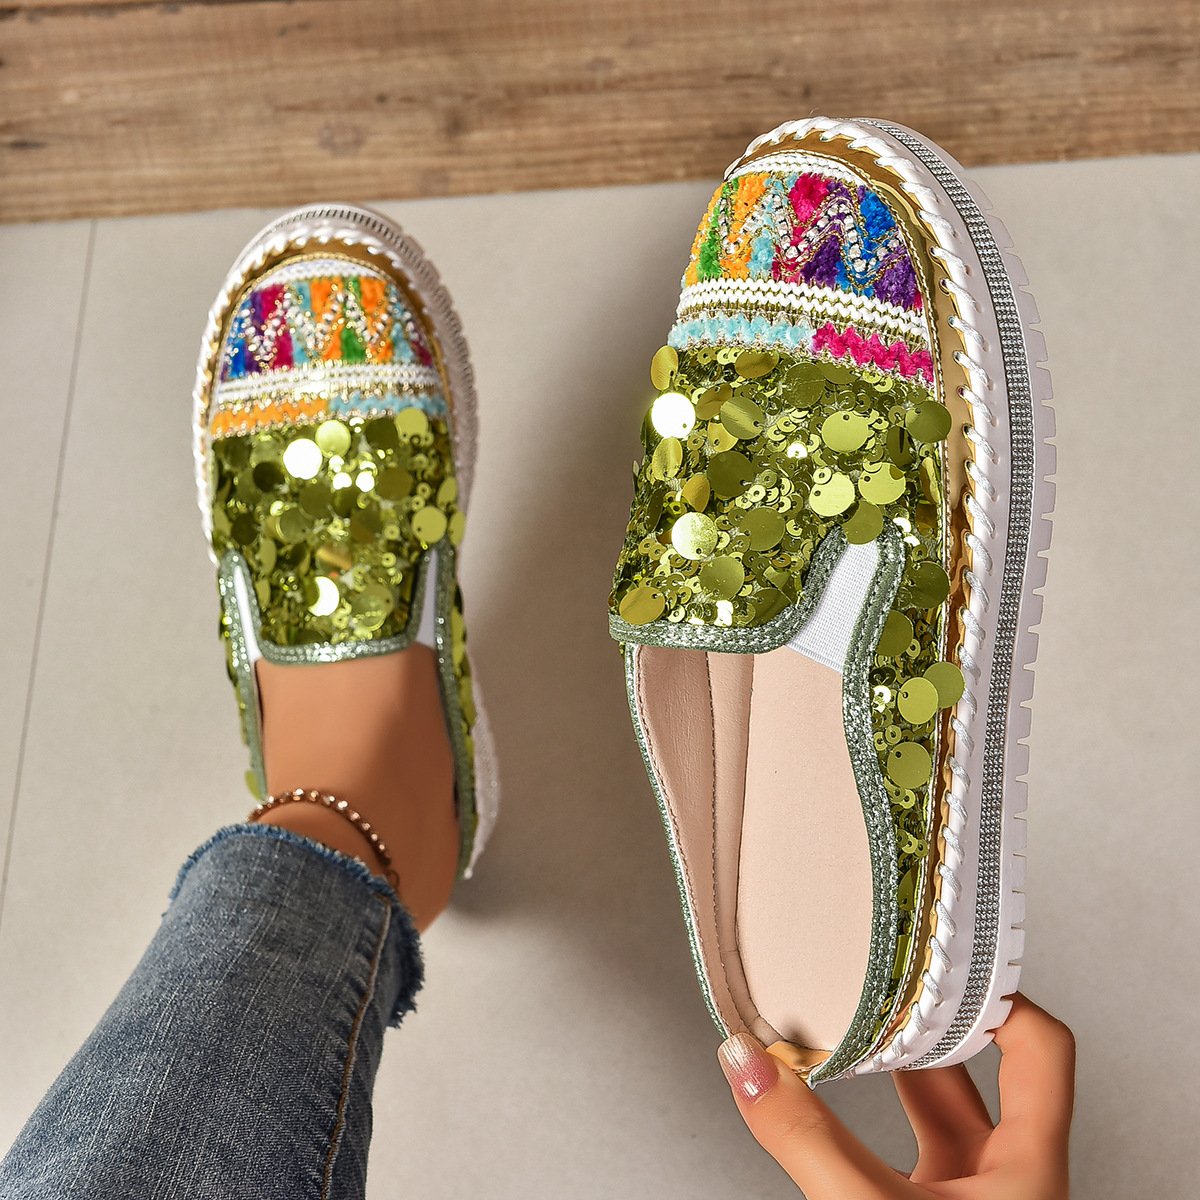 Sequins Comfortable Slippers